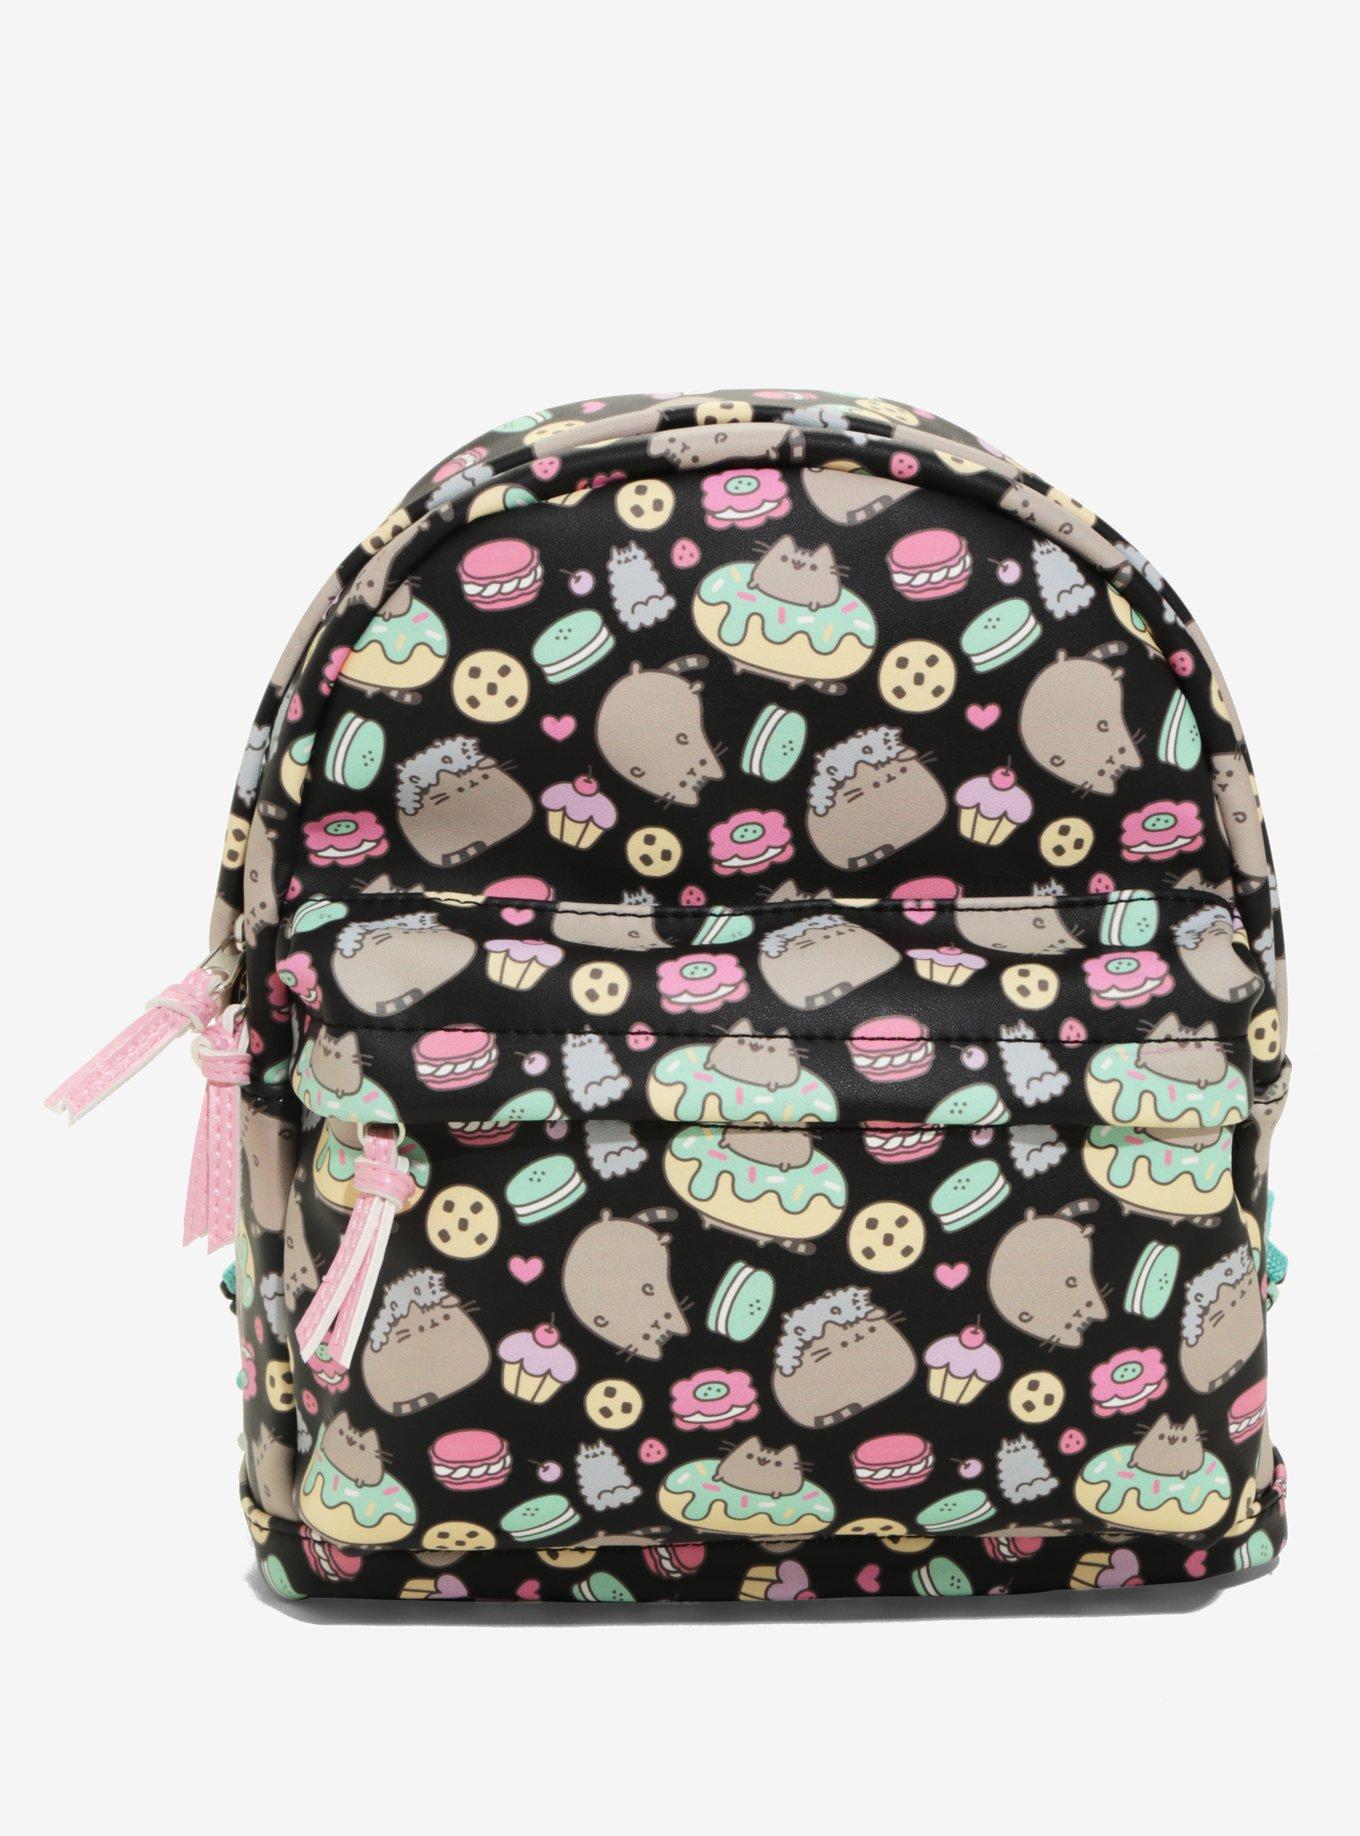 Pusheen Snack Attack 3-Pocket Pouch